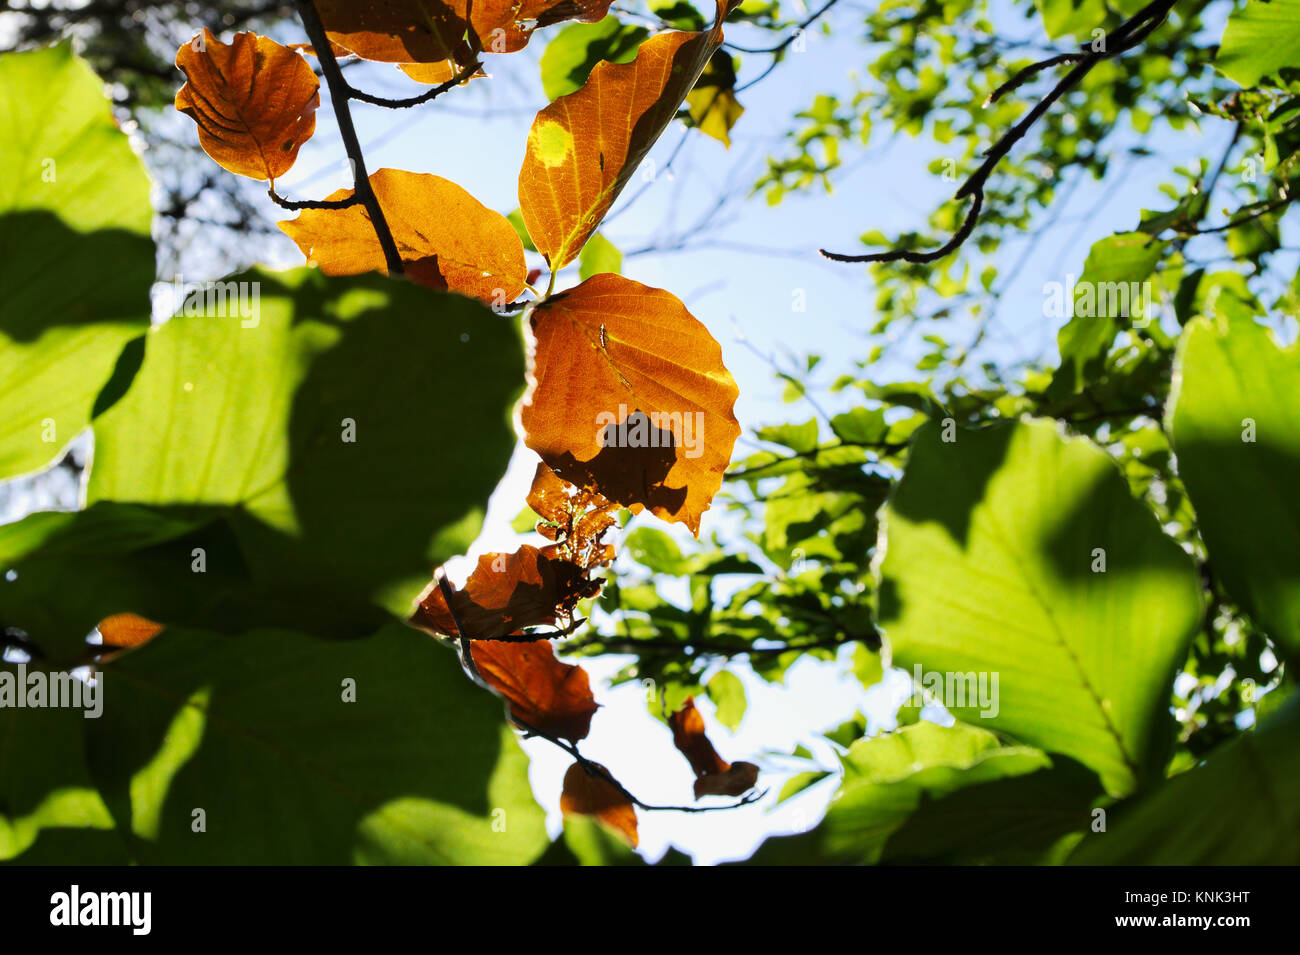 Beech leaves growing on tree branch. Green and brown dried beech foliage backlit by the sun against blue sky. Nature background. Stock Photo